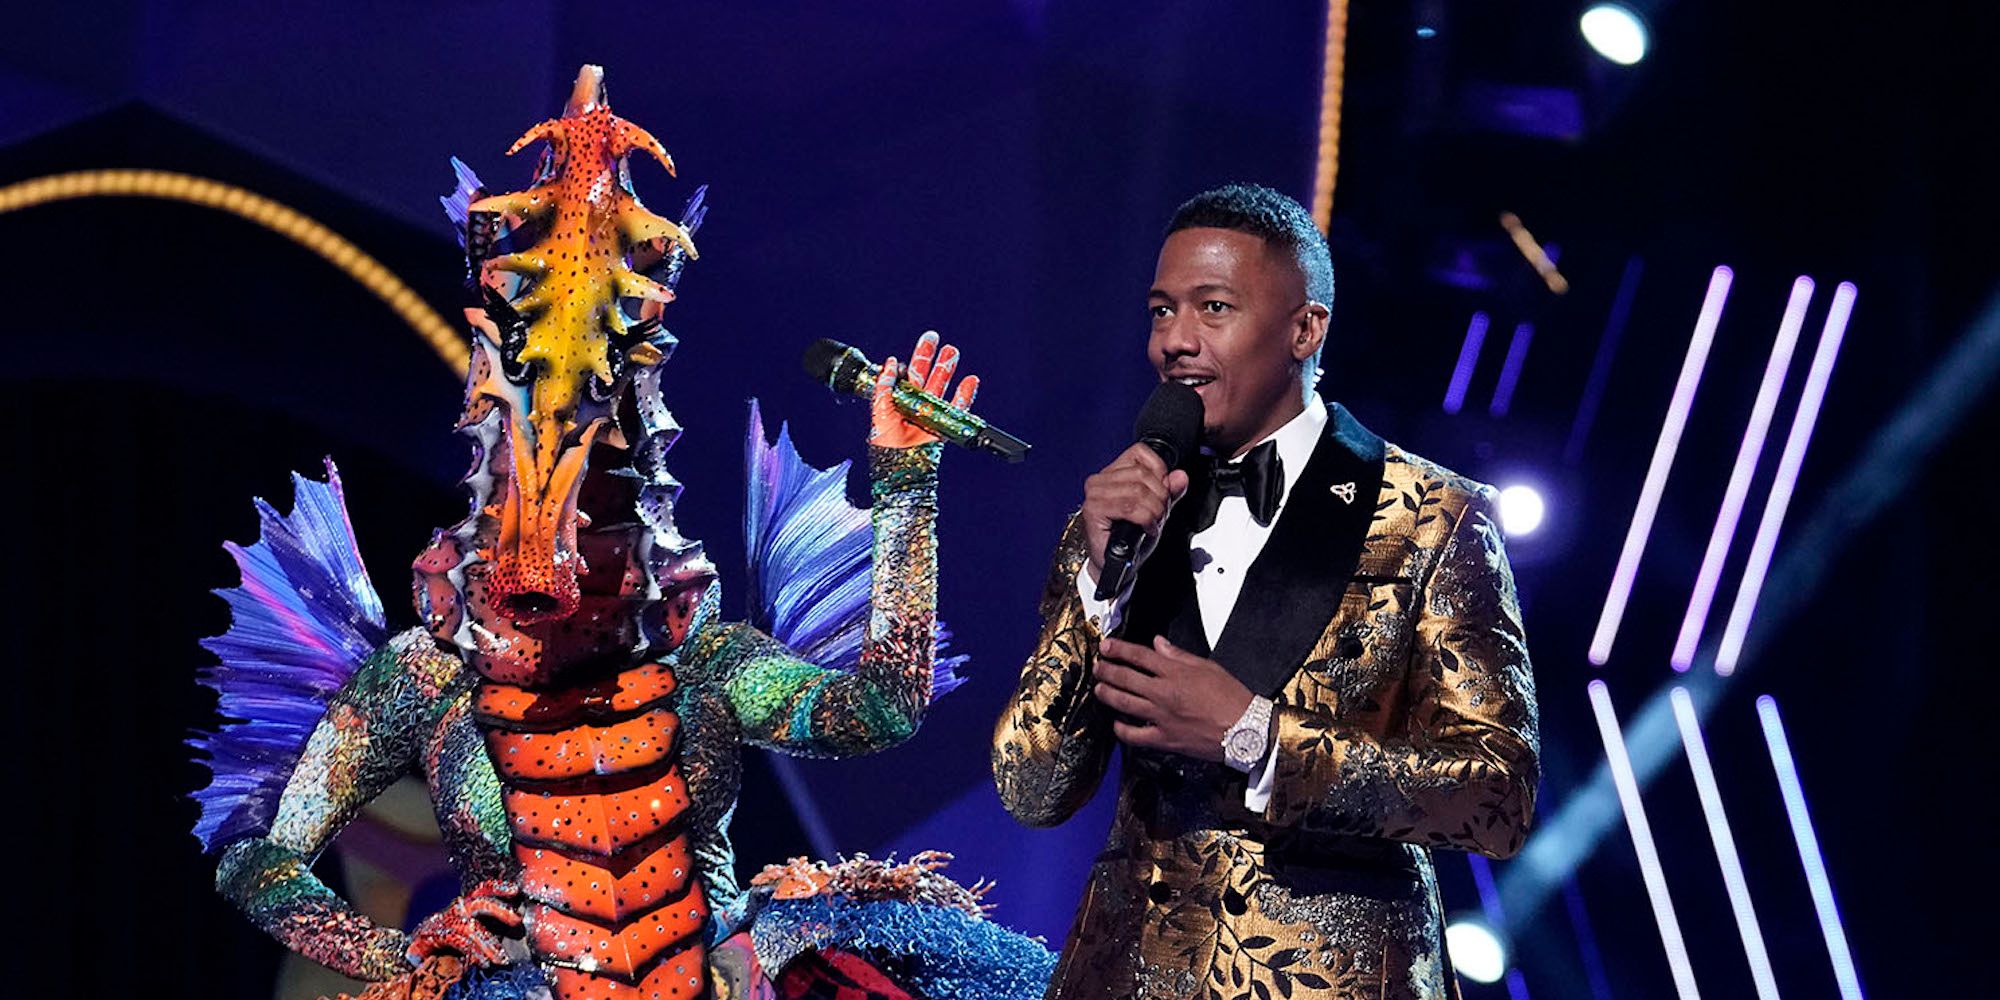 The Masked Singer Season 4 semi finals seahorse and nick cannon